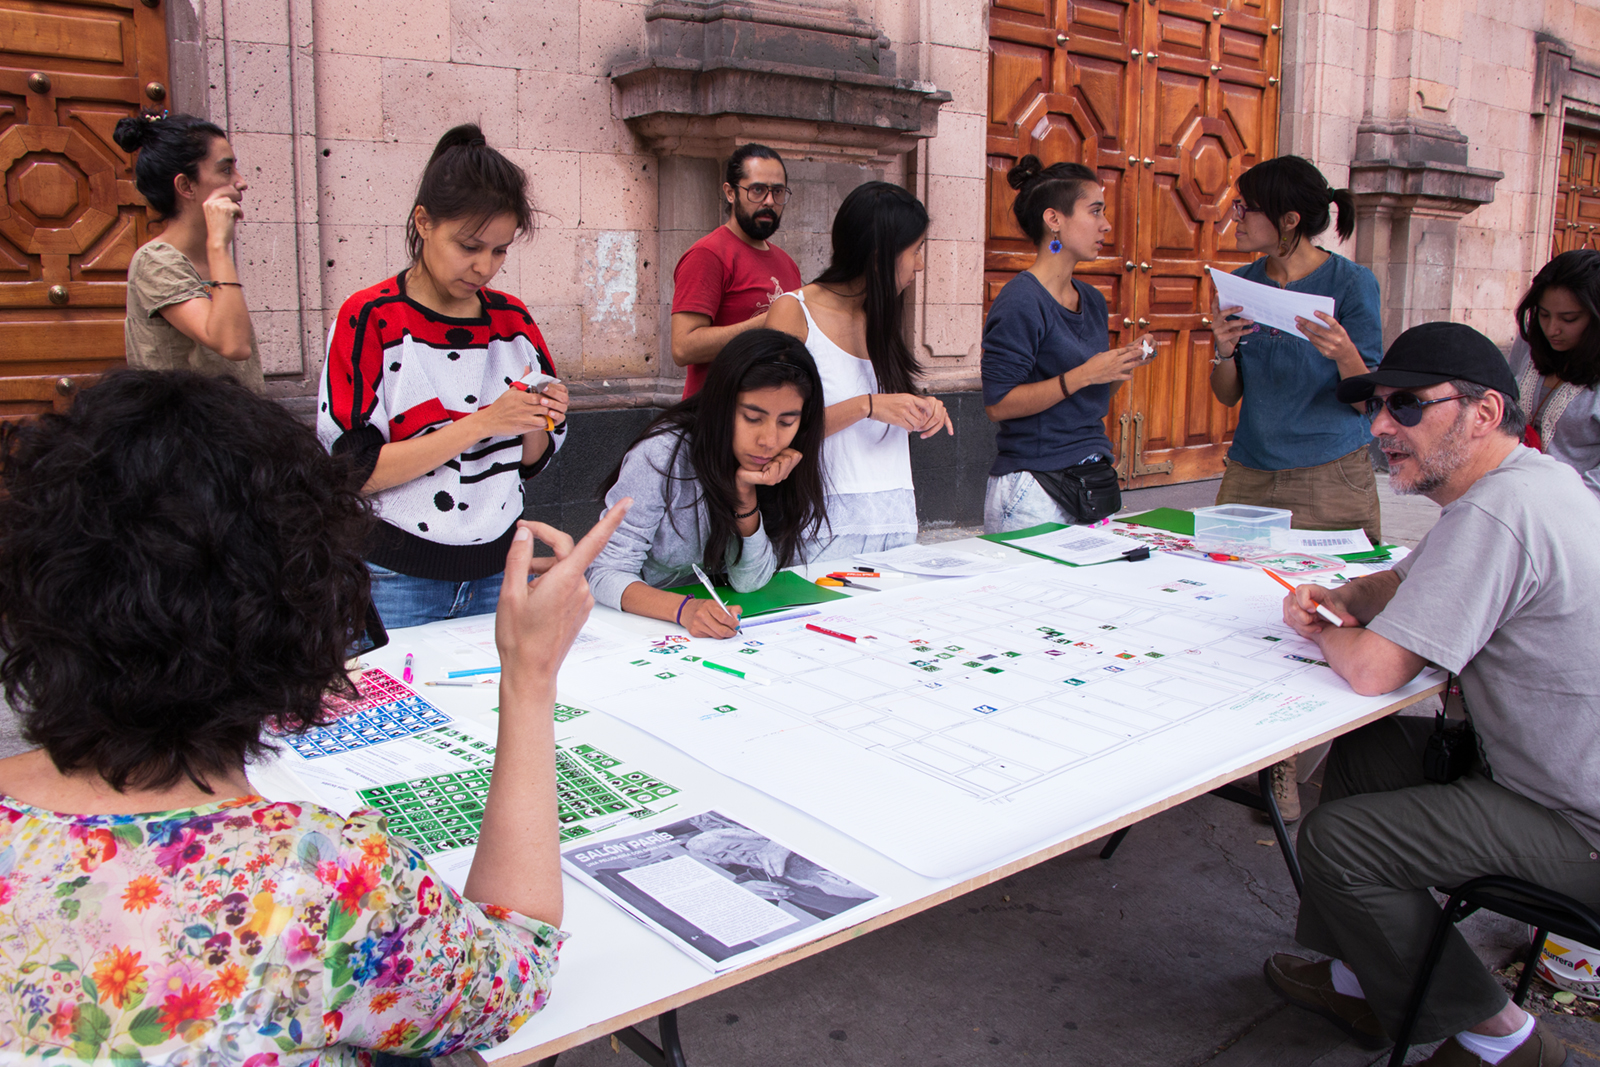 Poster for mapping in a public space, Mexico City, 2015